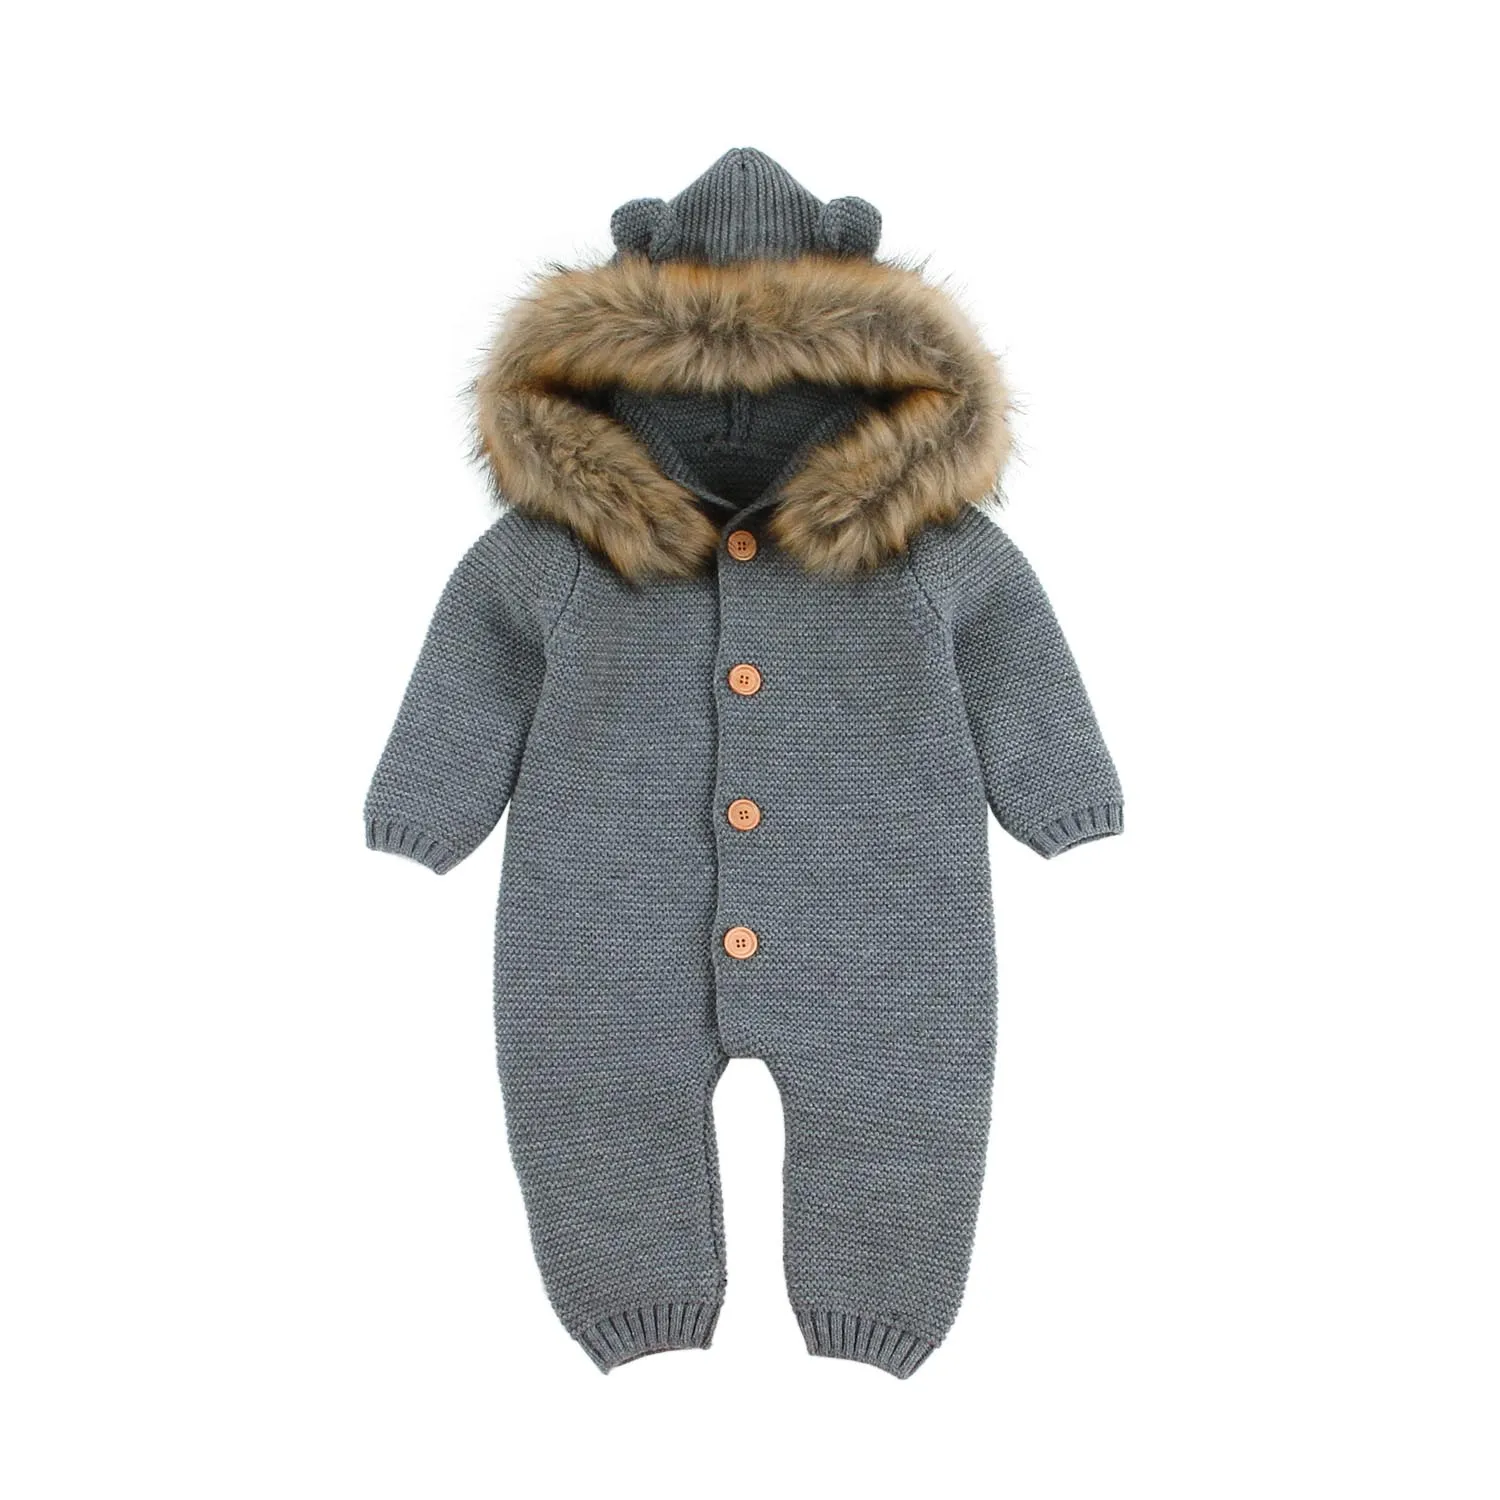 Winter Warm Children's Overalls Boys Clothes Bear Knitted Newborn Baby Rompers Hooded Full Sleeves Infant Girl Jumpsuits Outfits - Цвет: Grey Baby Rompers